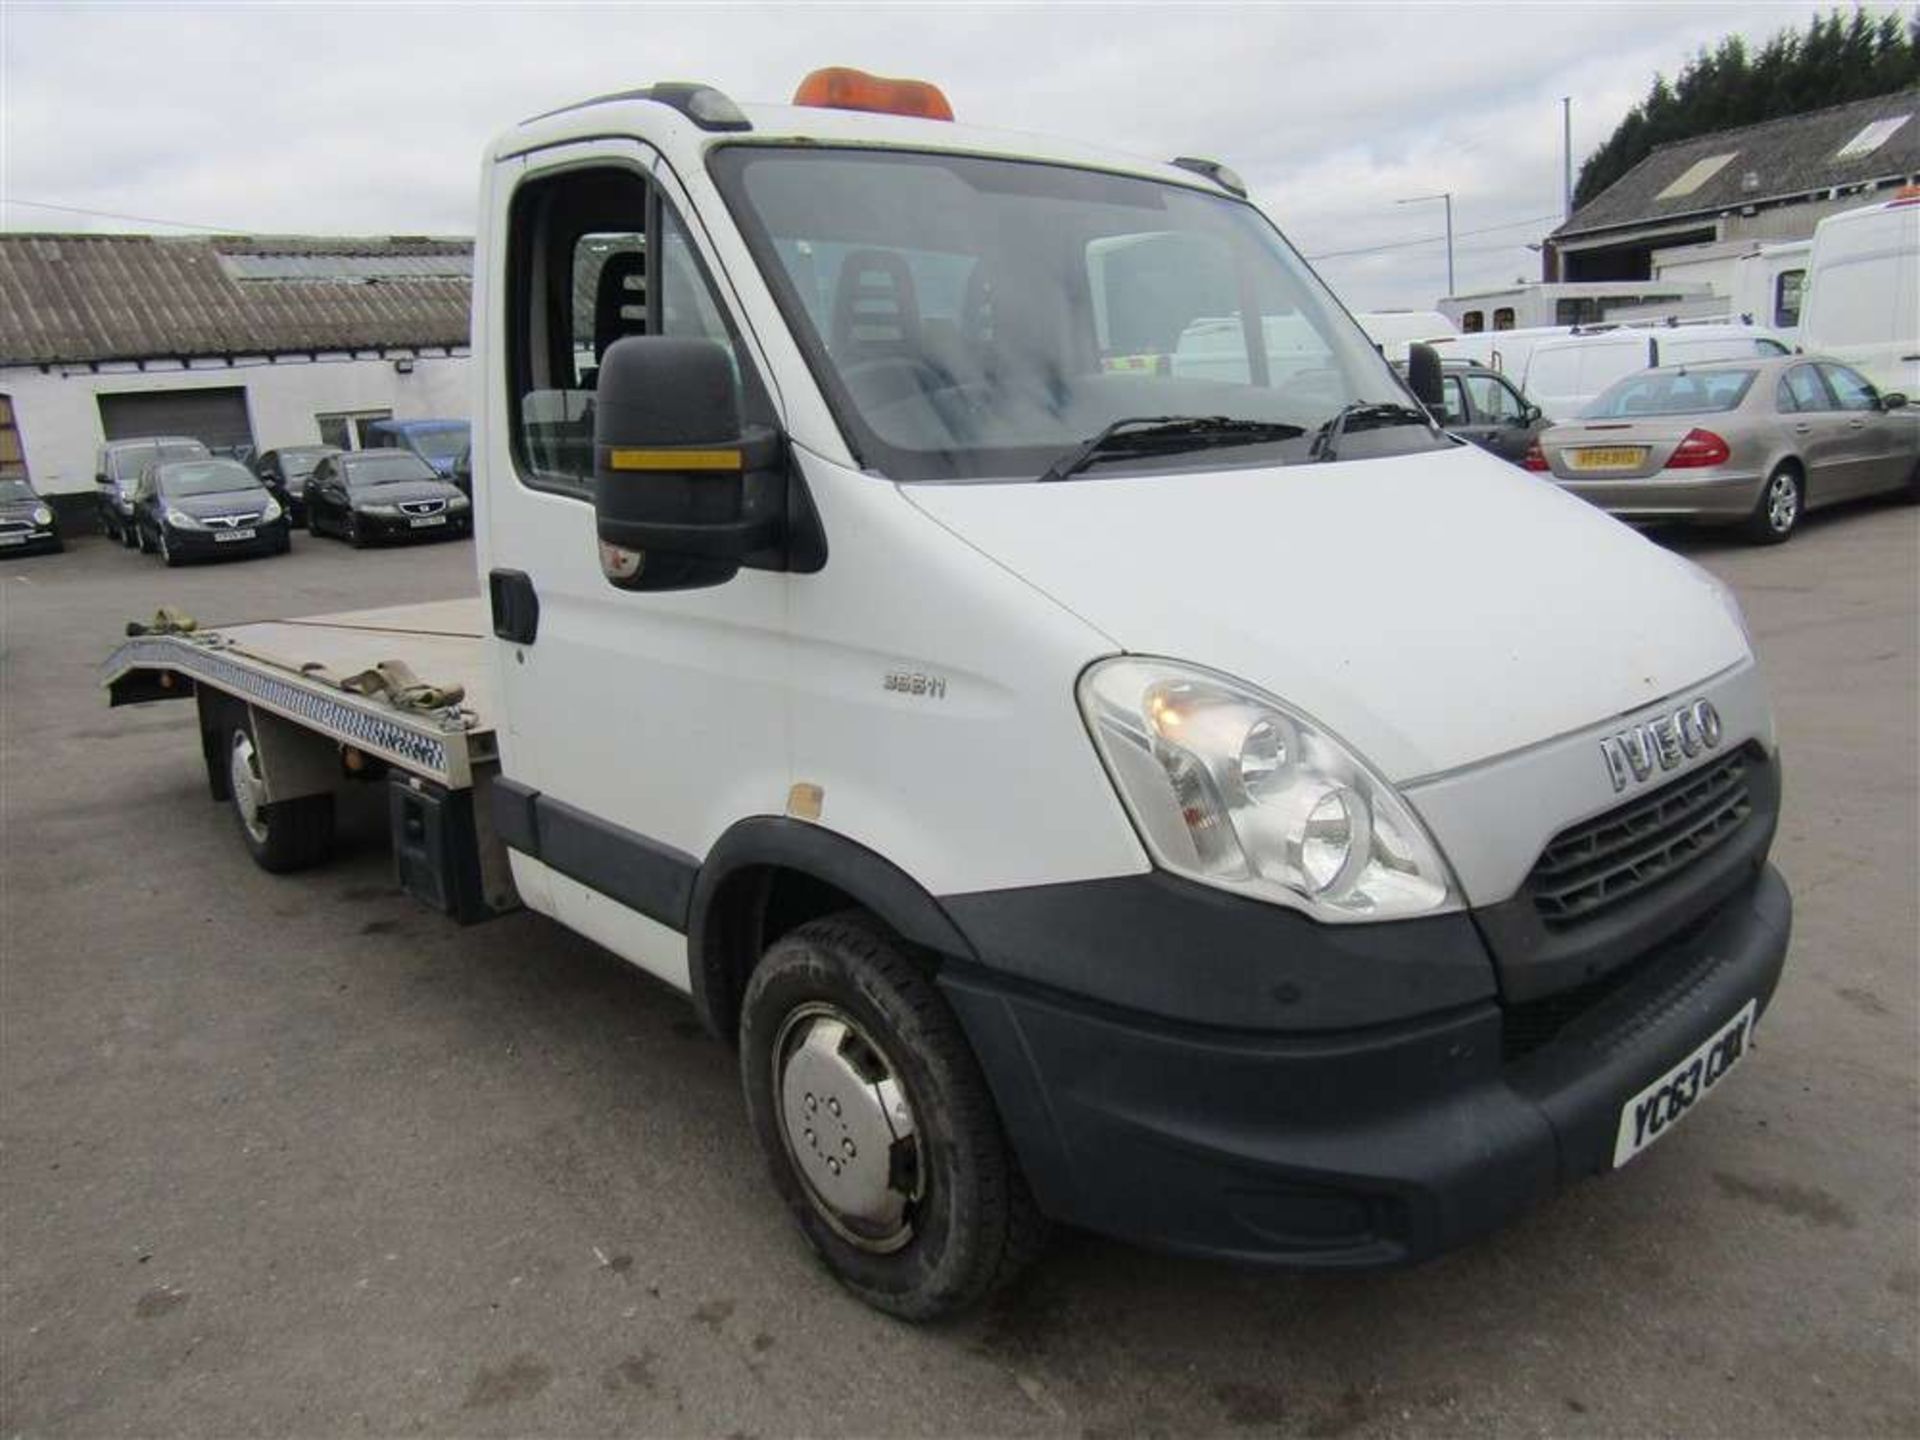 2013 63 reg Iveco Daily 35S11 LWB Recovery Truck